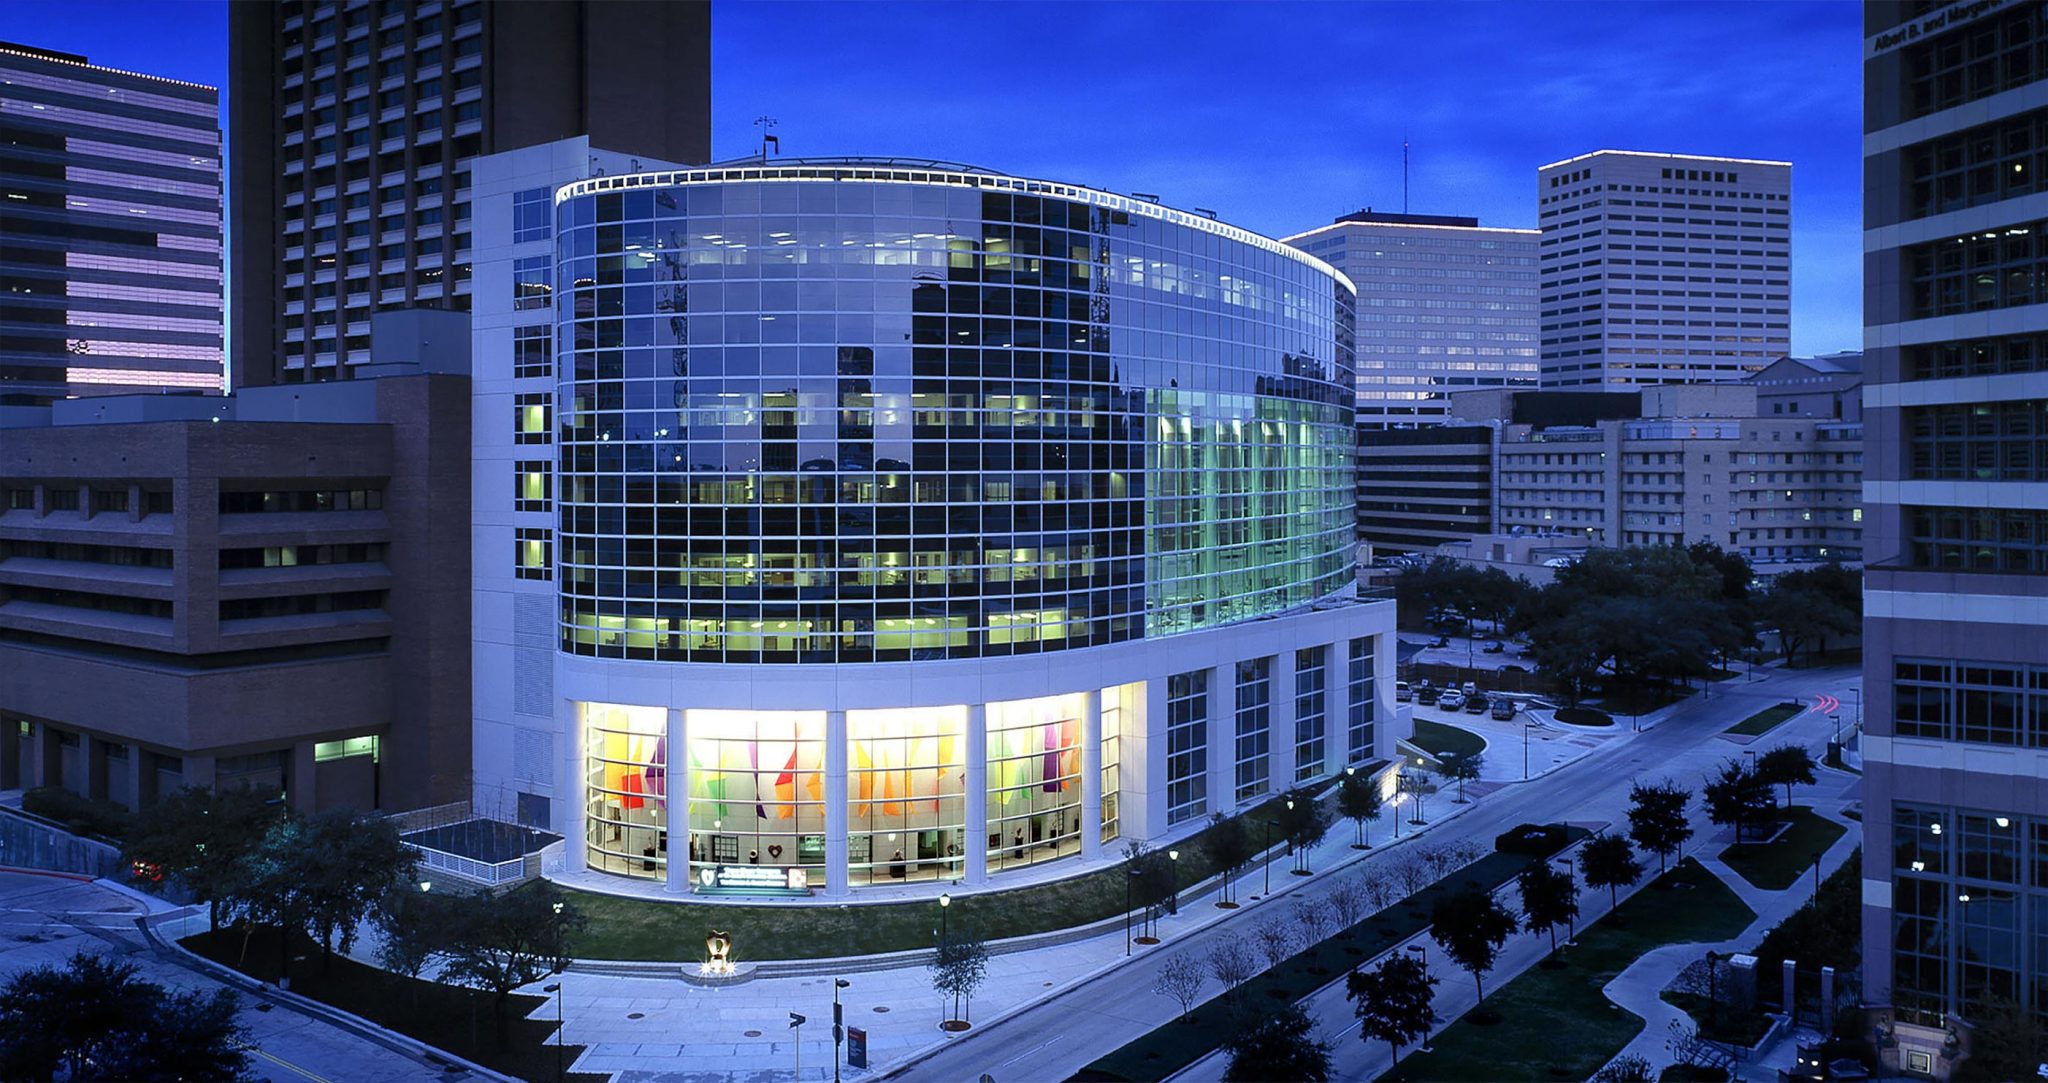 The Texas Heart Institute School of Perfusion Technology